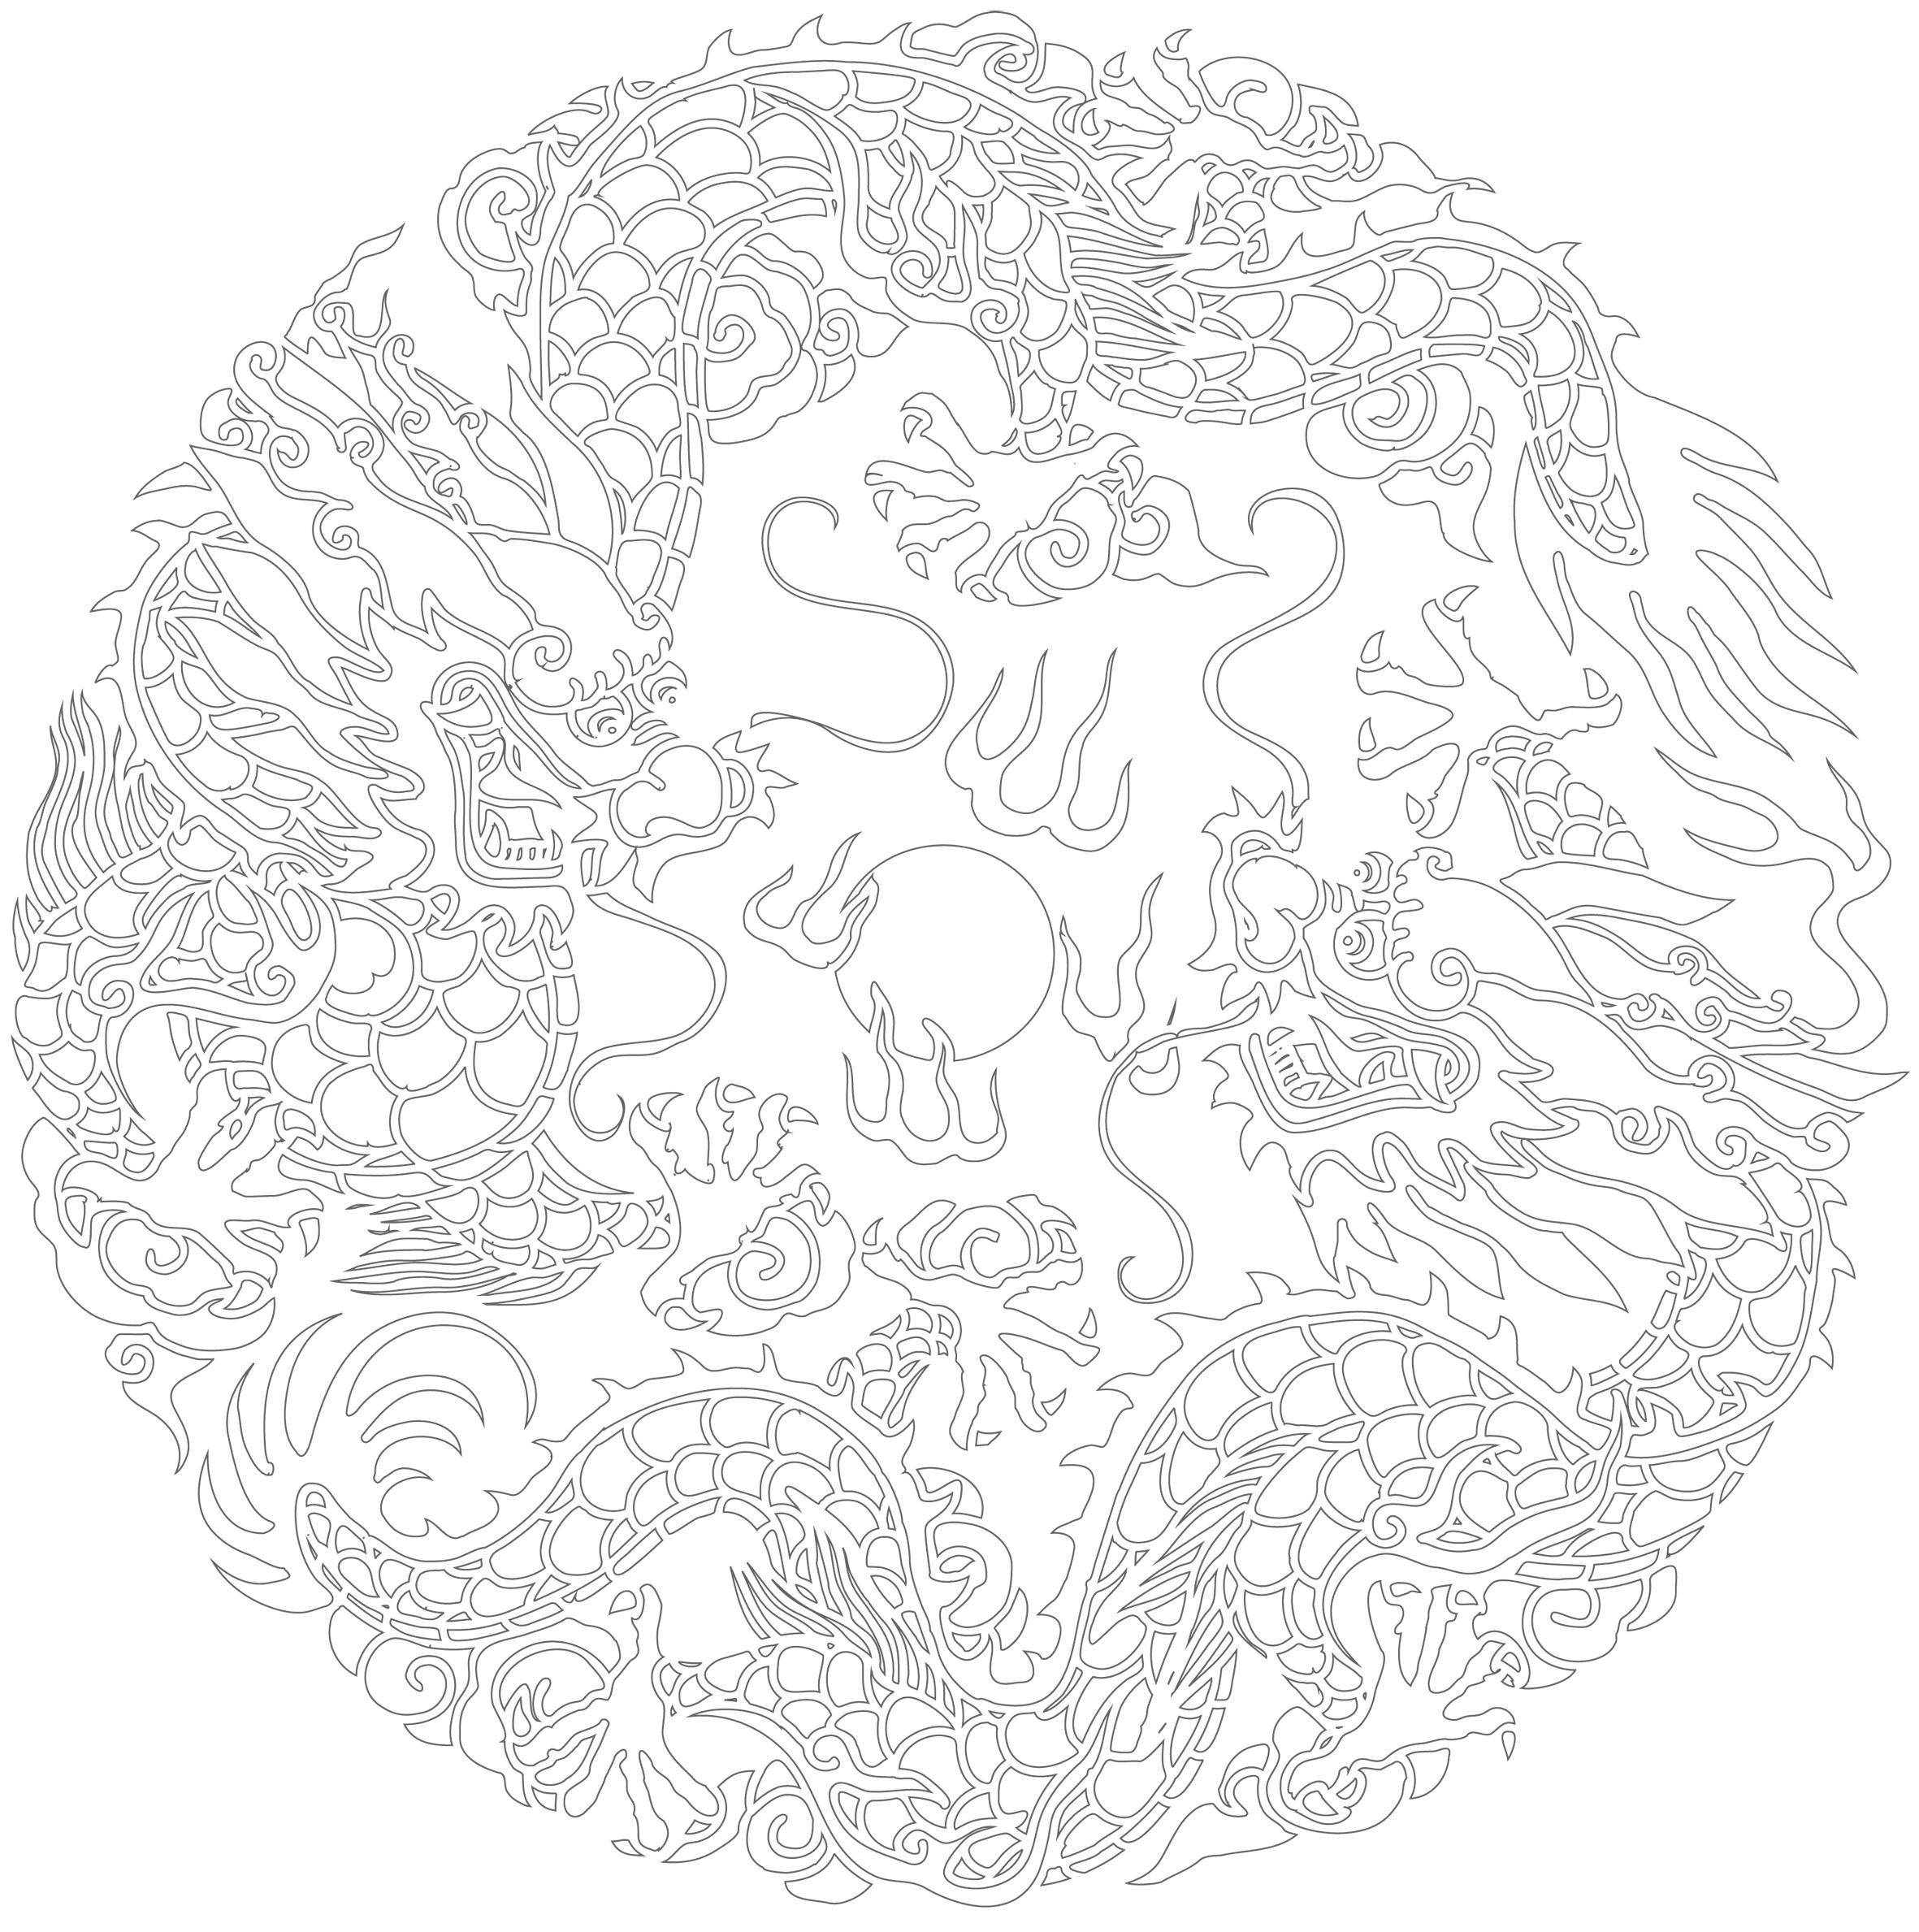 Coloring Chinese pattern. Category patterns. Tags:  Patterns, people.